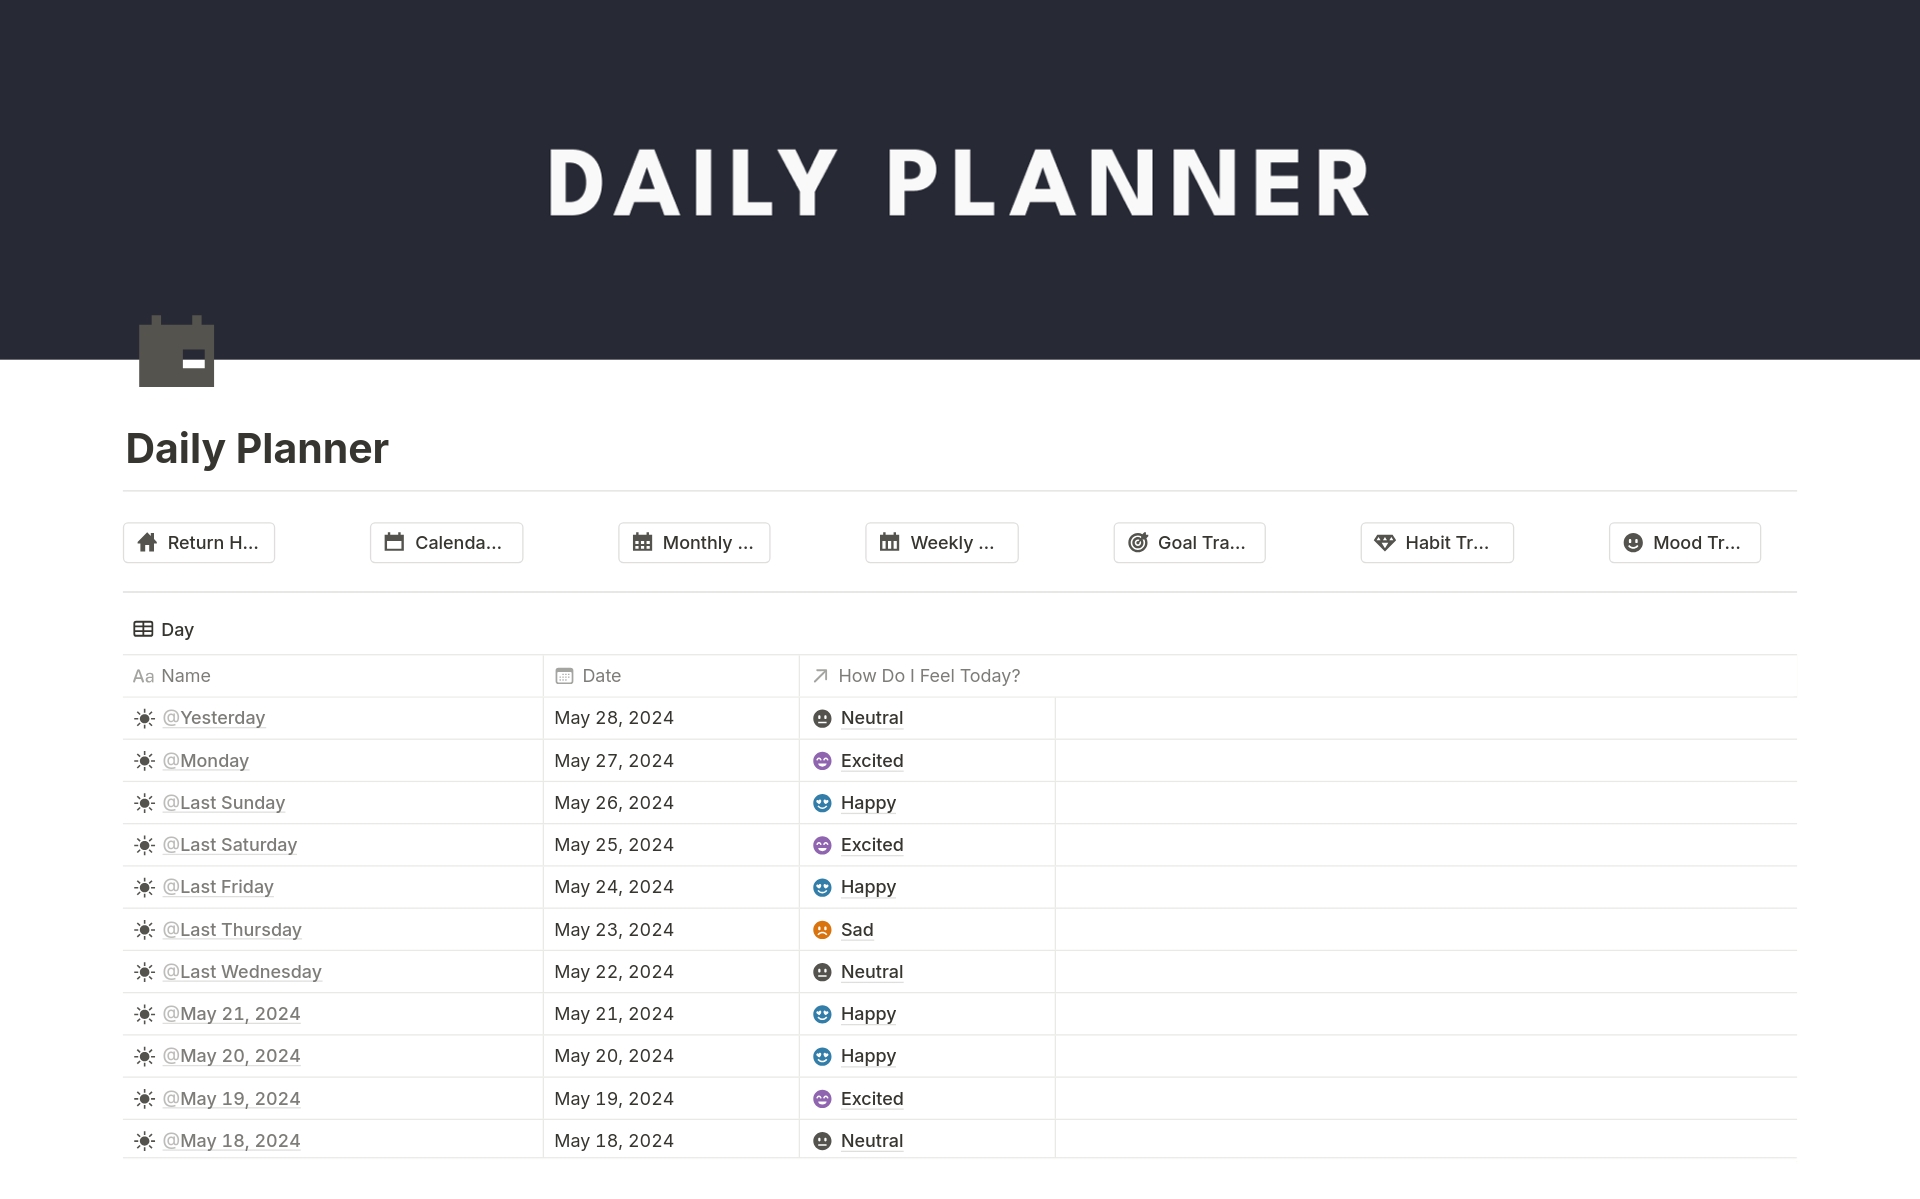 Goal Planner is your all-in-one system for achieving your goals. 

Break down big goals, track progress visually, and stay organized with monthly, weekly & daily planners. 

It's perfect for everyone! Crush your goals, while tracking your habits and mood along your journey. 